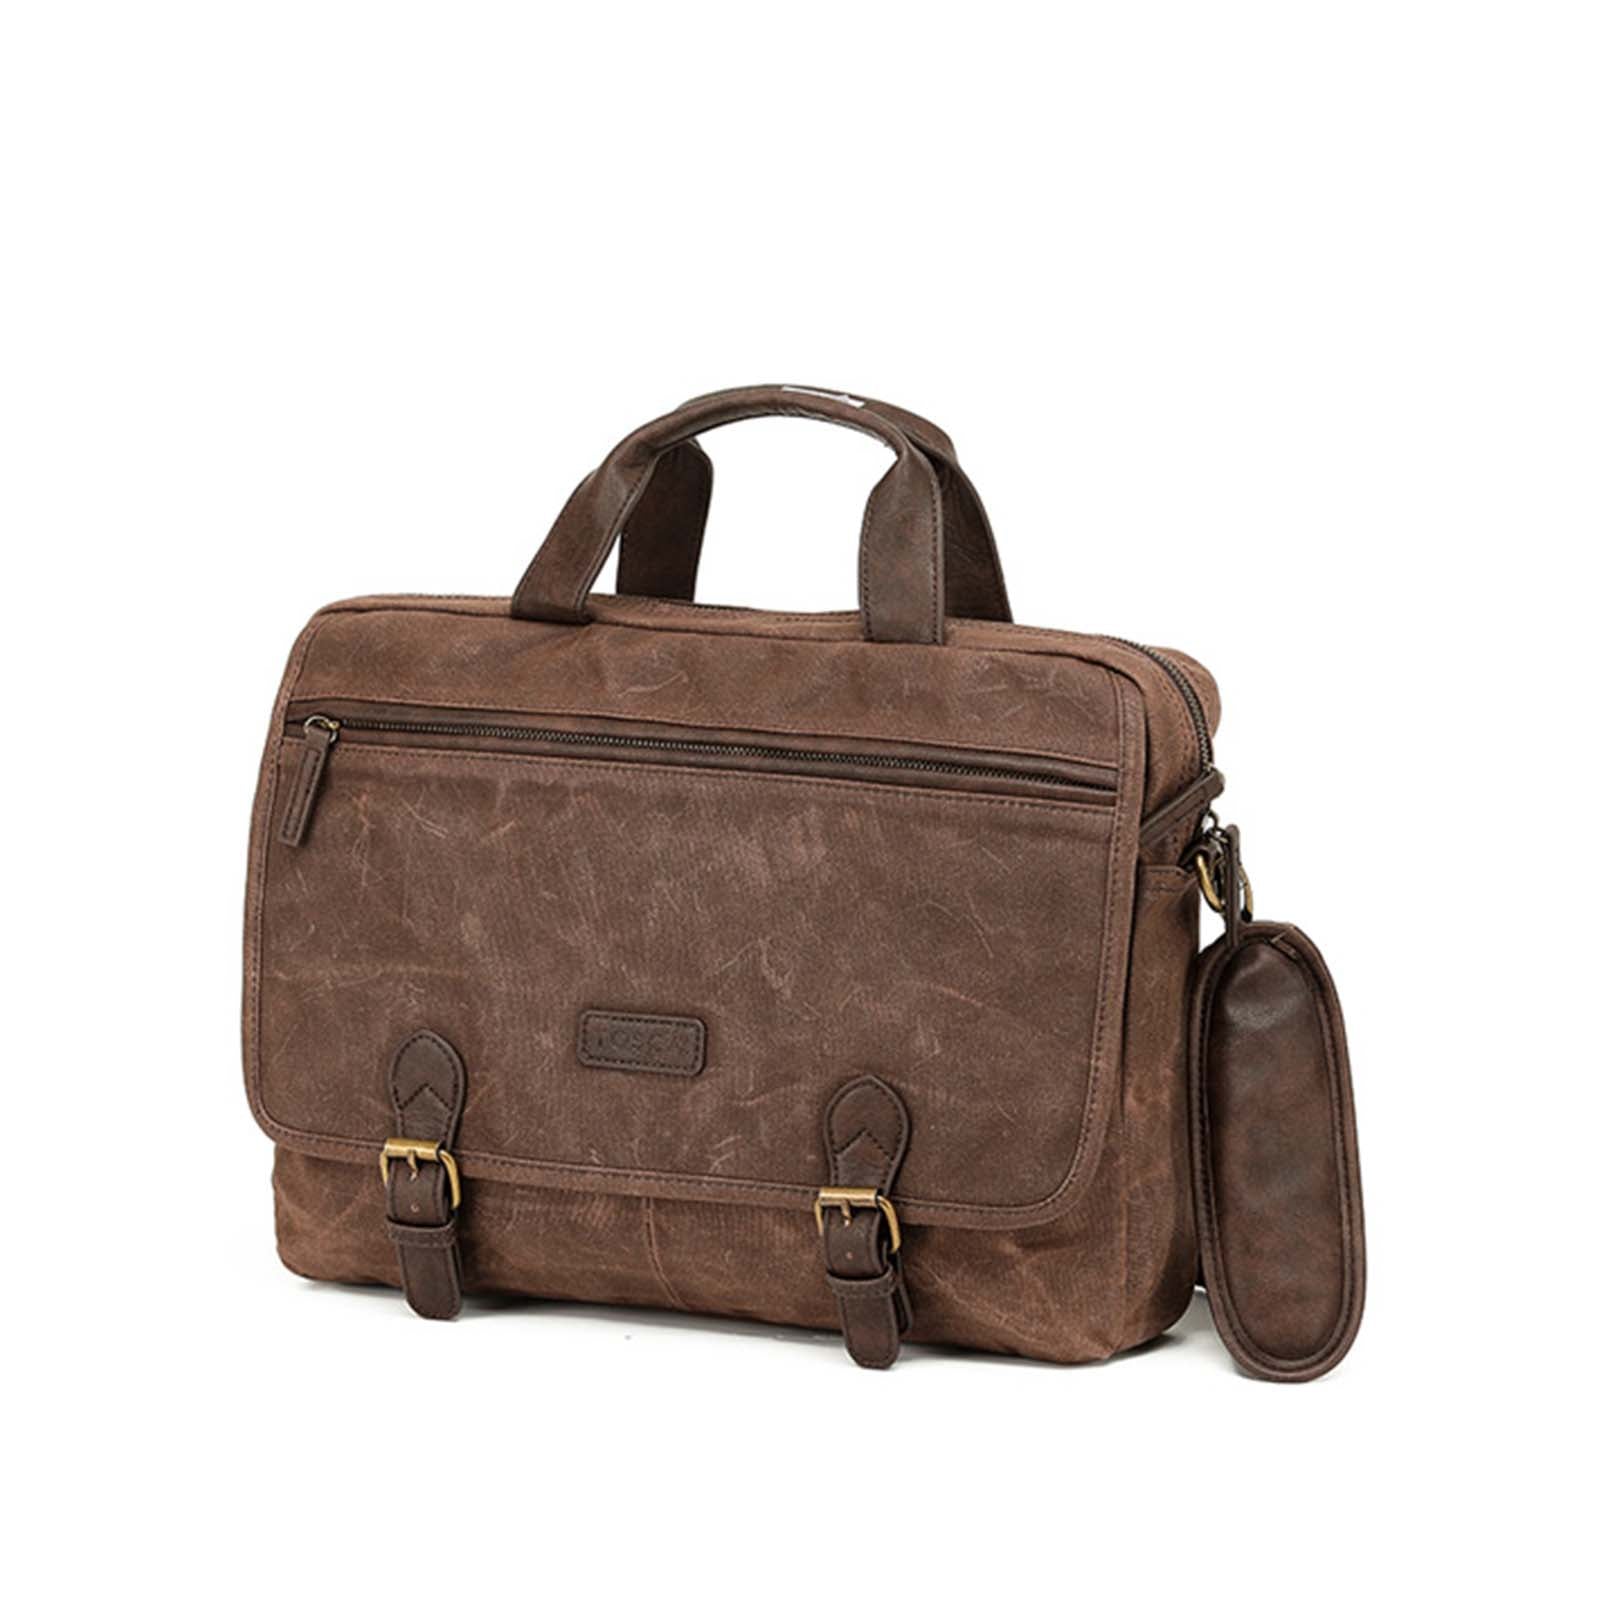 Tosca_Waxed_Canvas_Laptop_Bag_Brown_Front.jpg